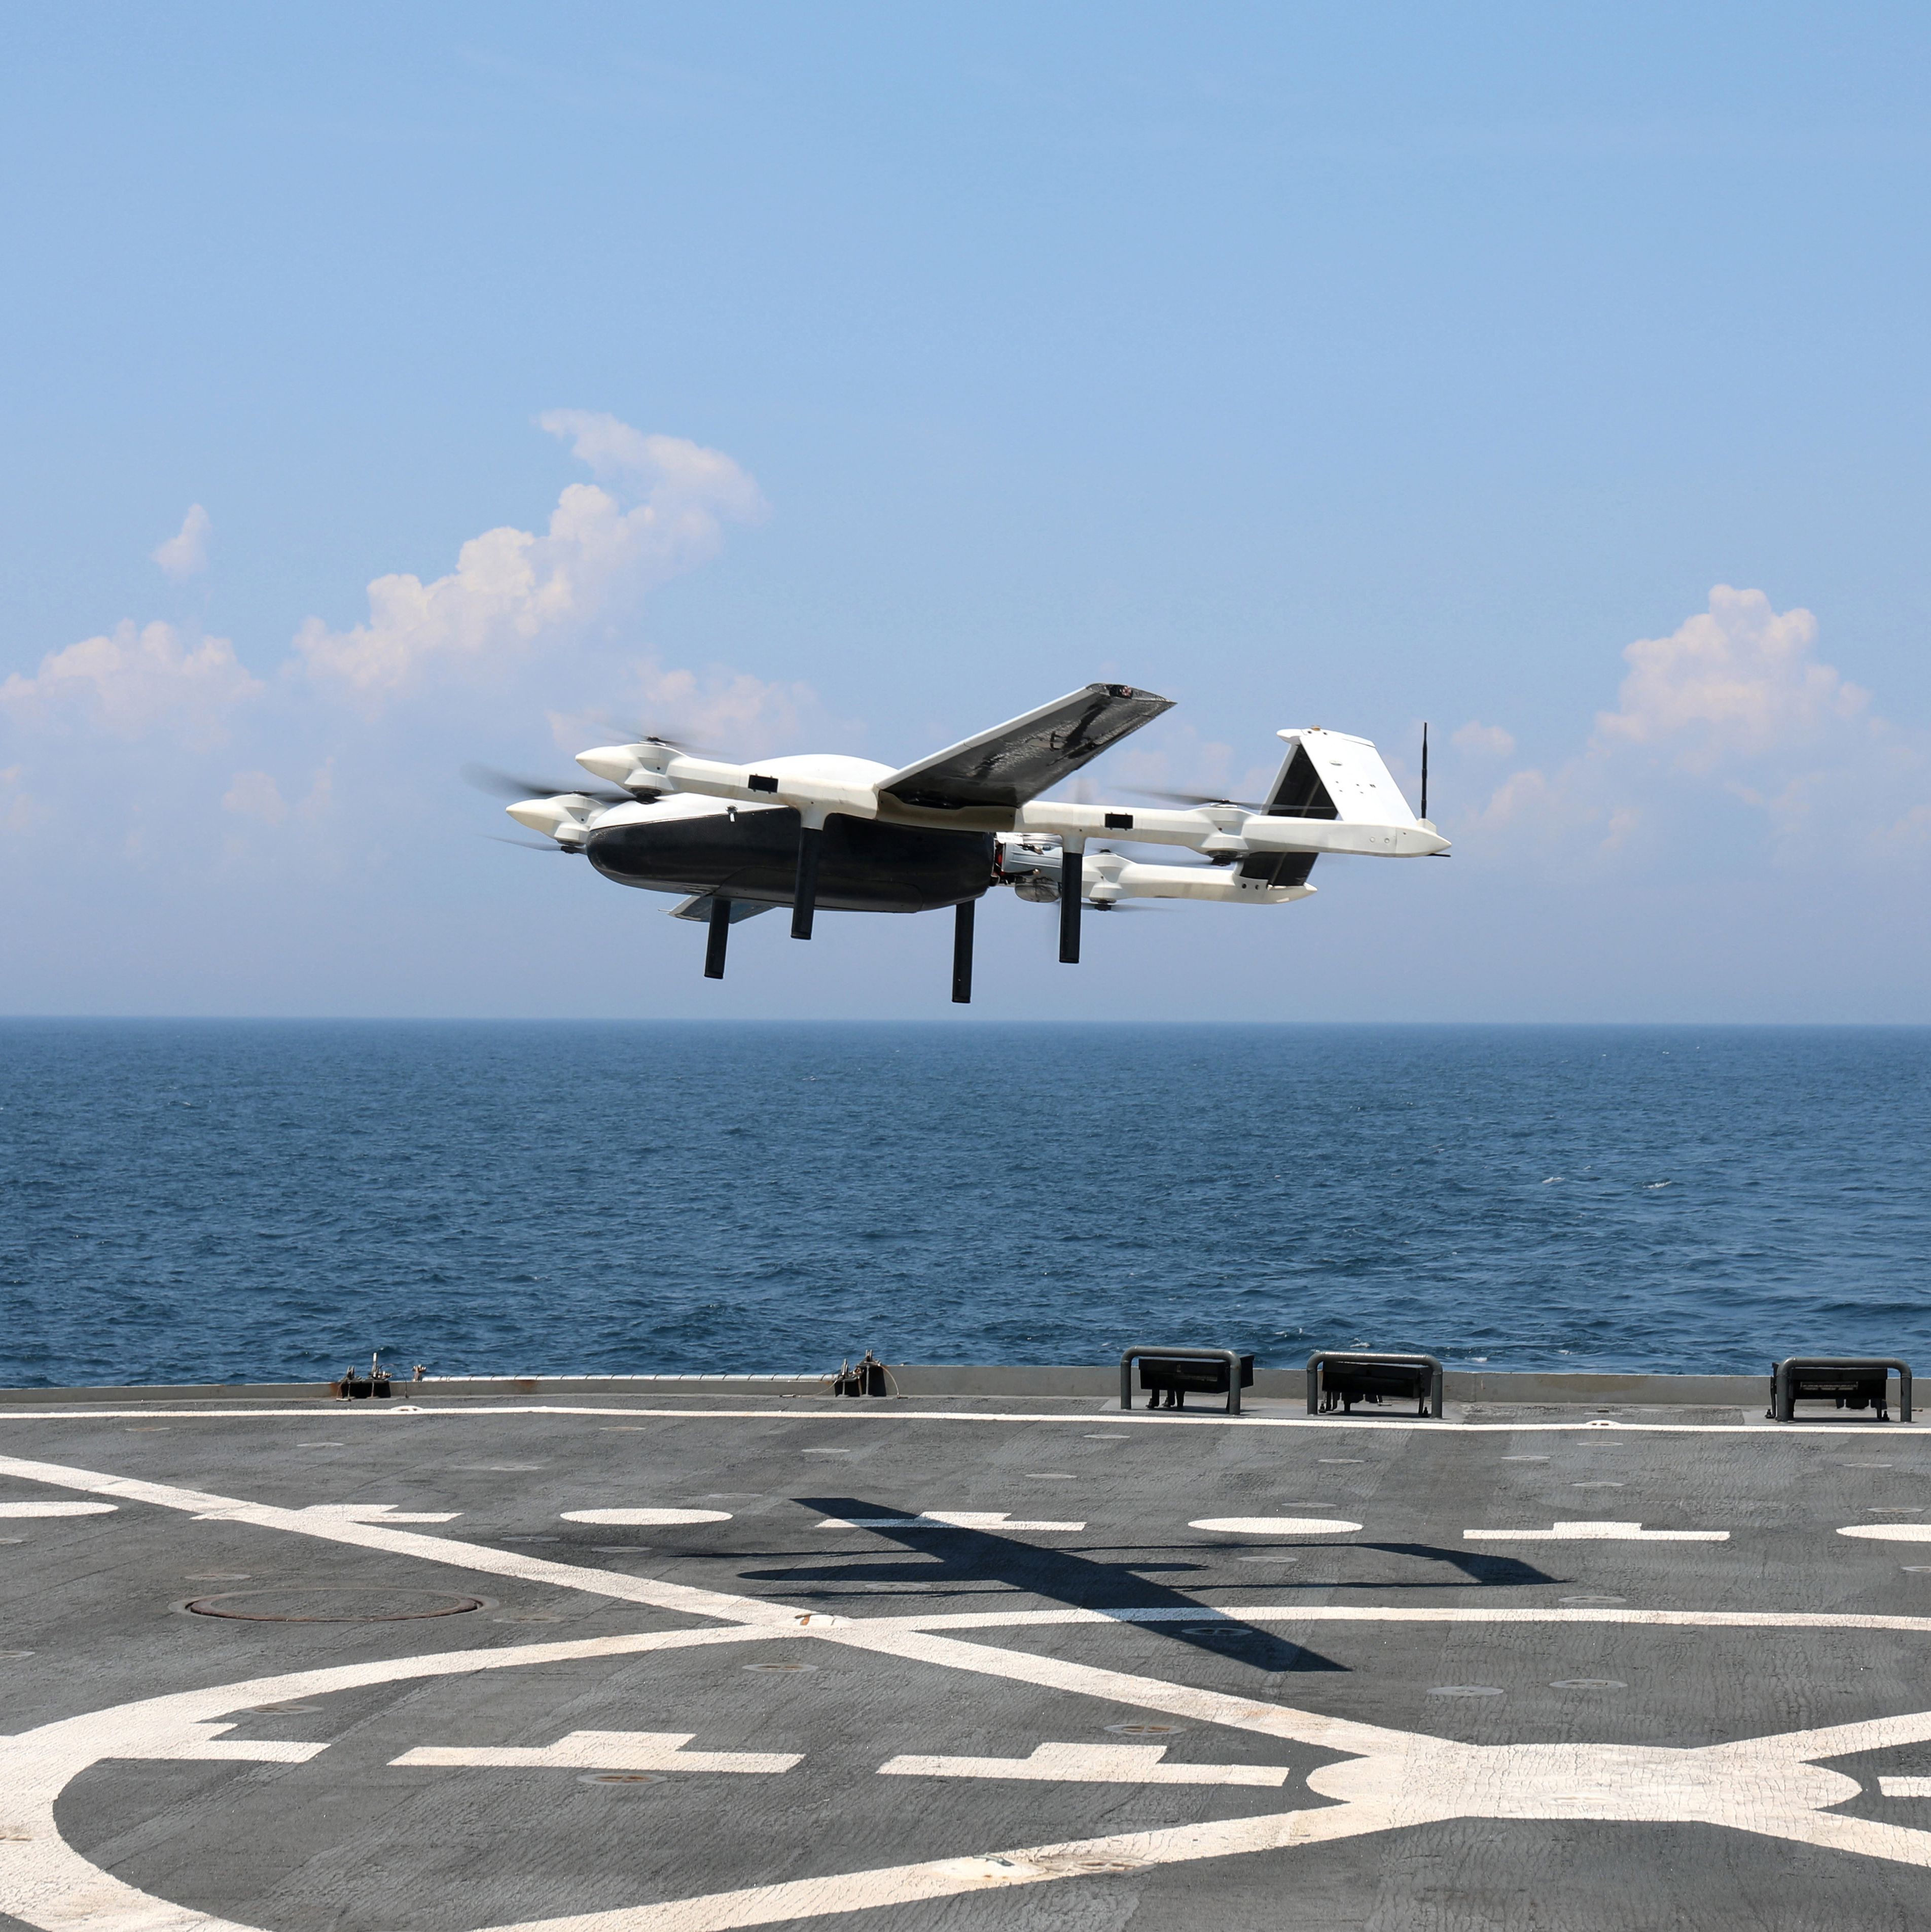 Moving Cargo From Ship to Ship Is So Dangerous That the Navy Is Recruiting Drones